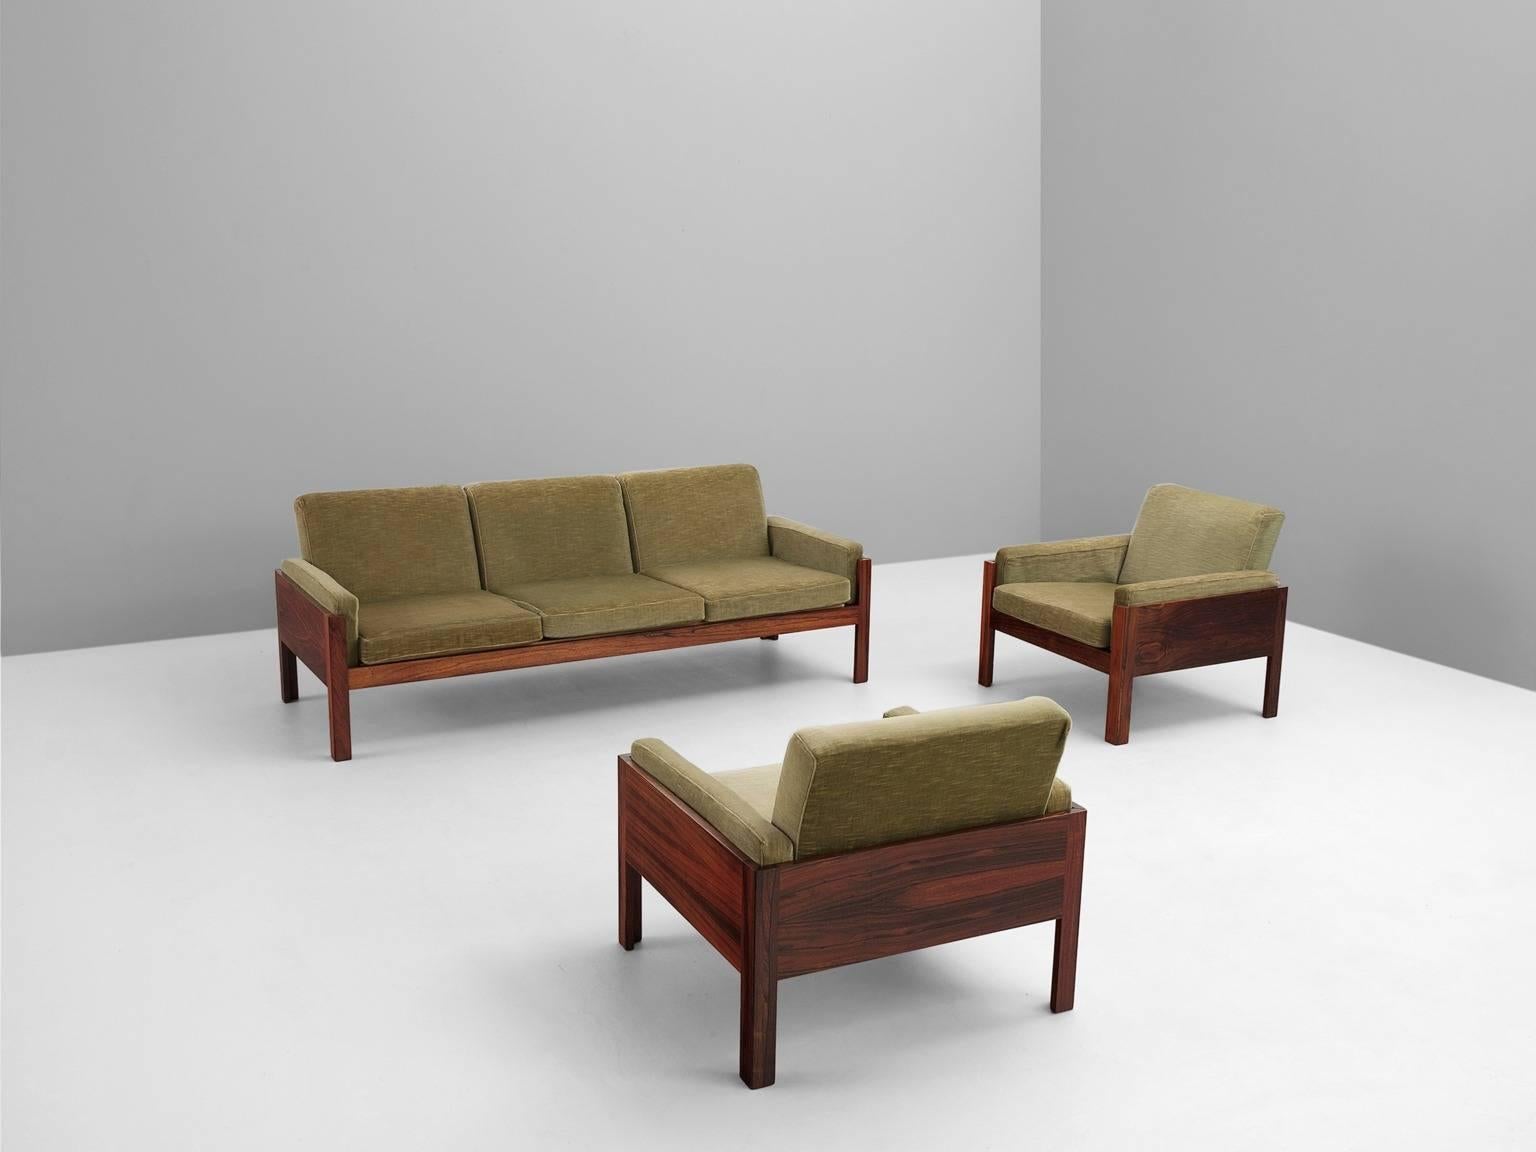 Salon set in rosewood and fabric, Scandinavia 1960s.

Salon set with three-seat sofa and two lounge chairs. This set has a cubic and modern design. The sofa and chairs get a more open character by the four legs. The grain of the rosewood is